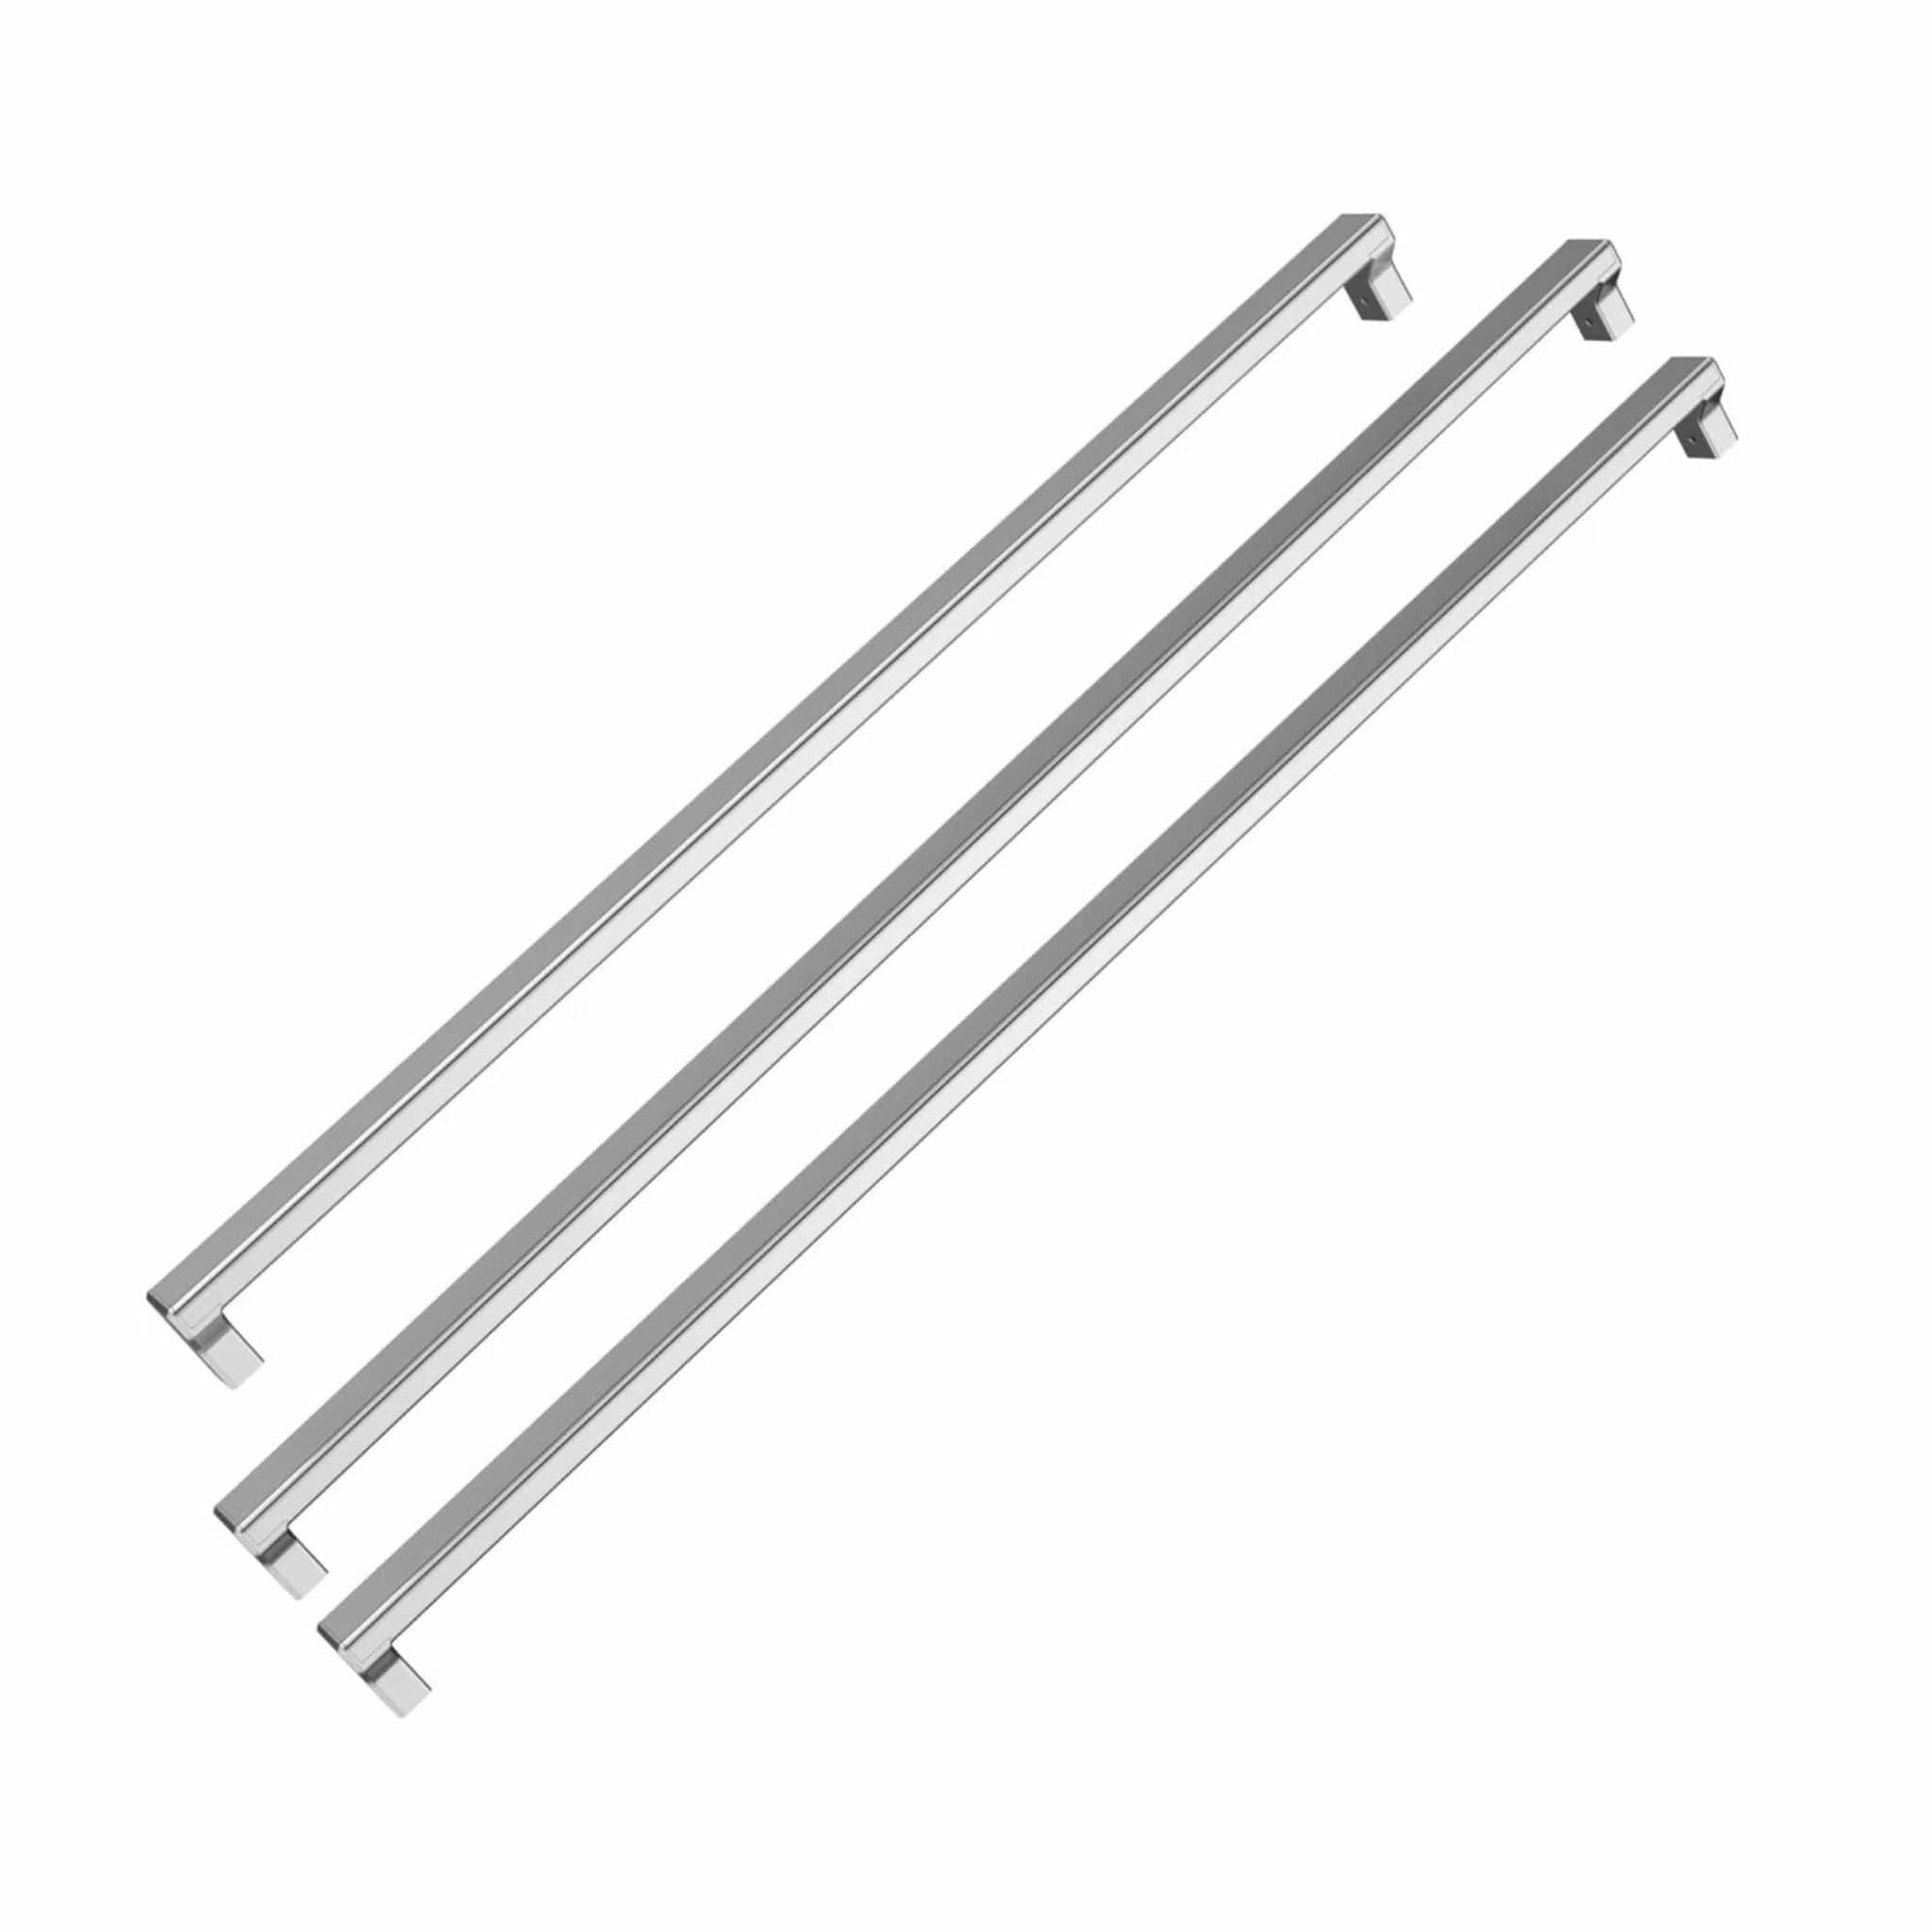 Bertazzoni Professional Series Handle kit for 36" Built-in French Door Refrigerator - Culinary Hardware